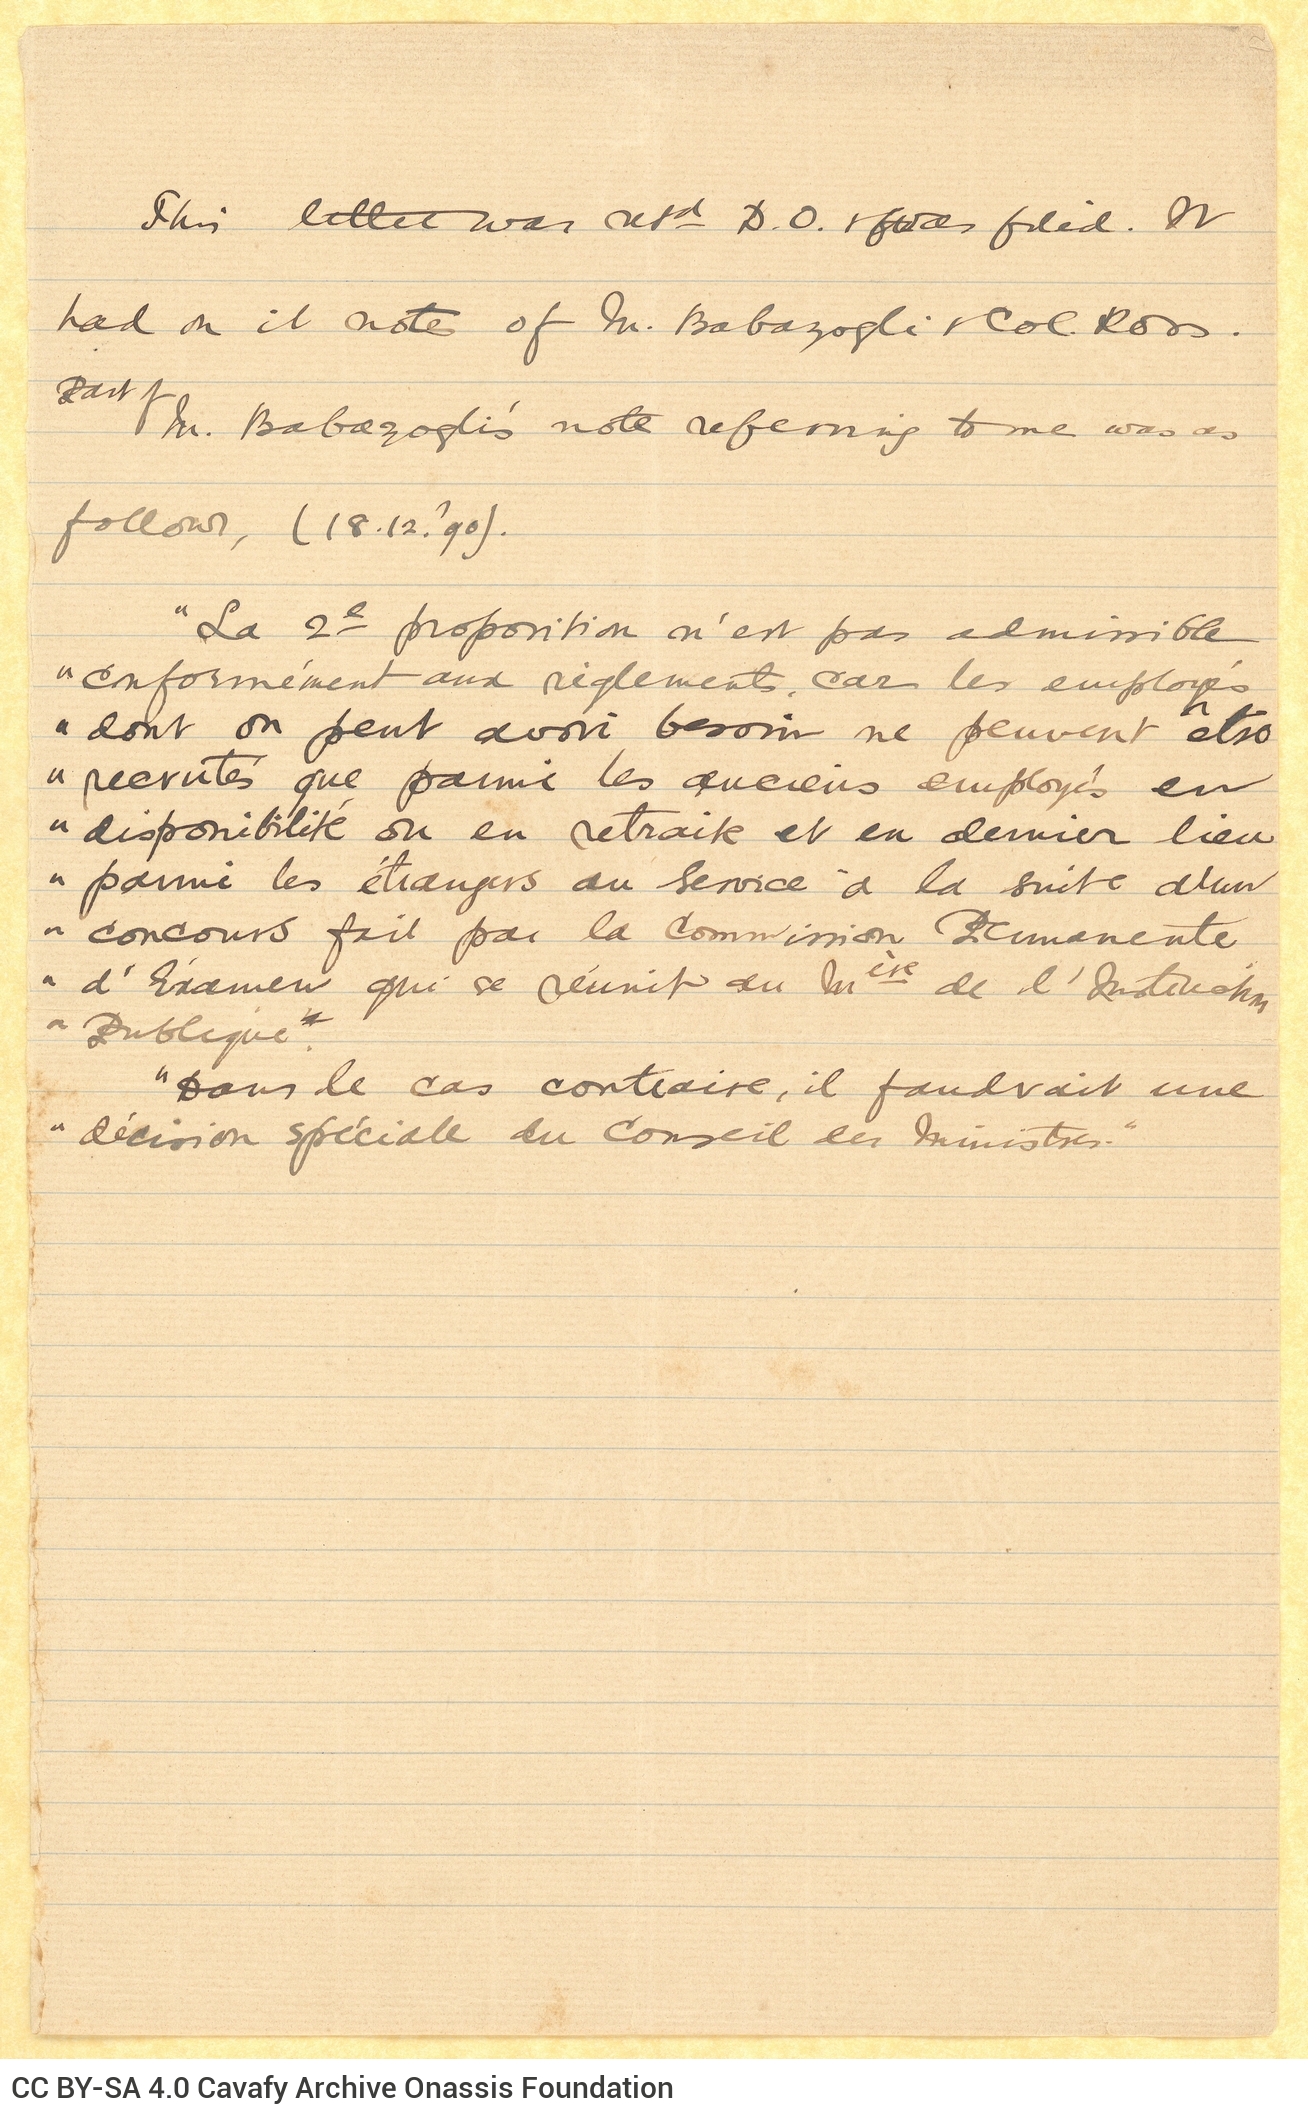 Handwritten copy of a letter to the Inspector General of Irrigation on the first two pages of a double sheet notepaper. Th